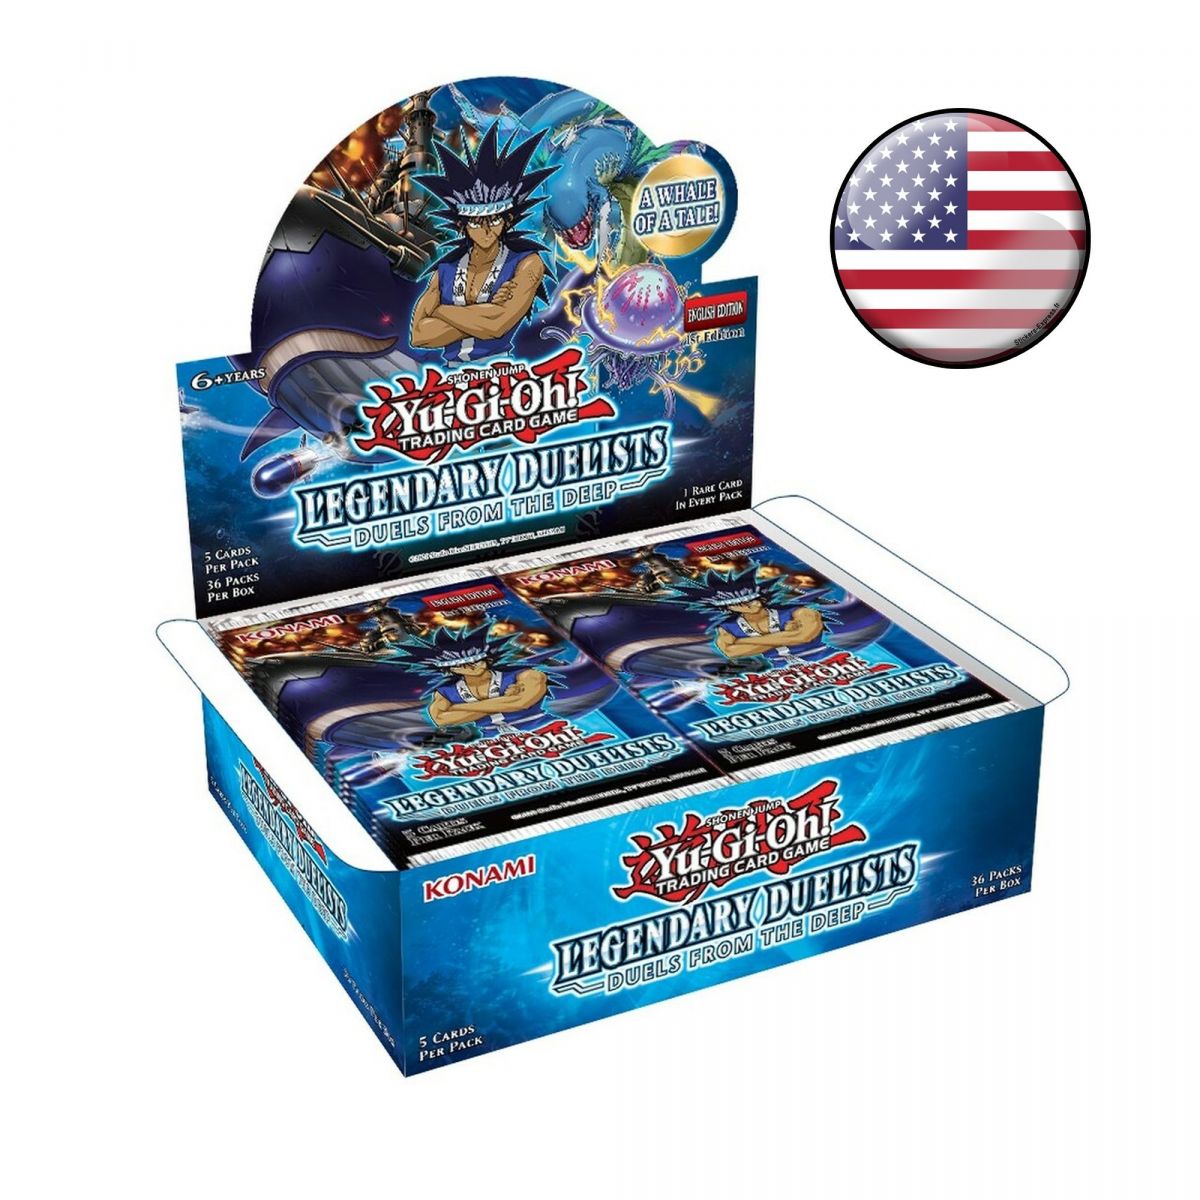 Item Yu Gi Oh! - Display - Box of 36 Boosters - Legendary Duelists: Duels from the Deep - US